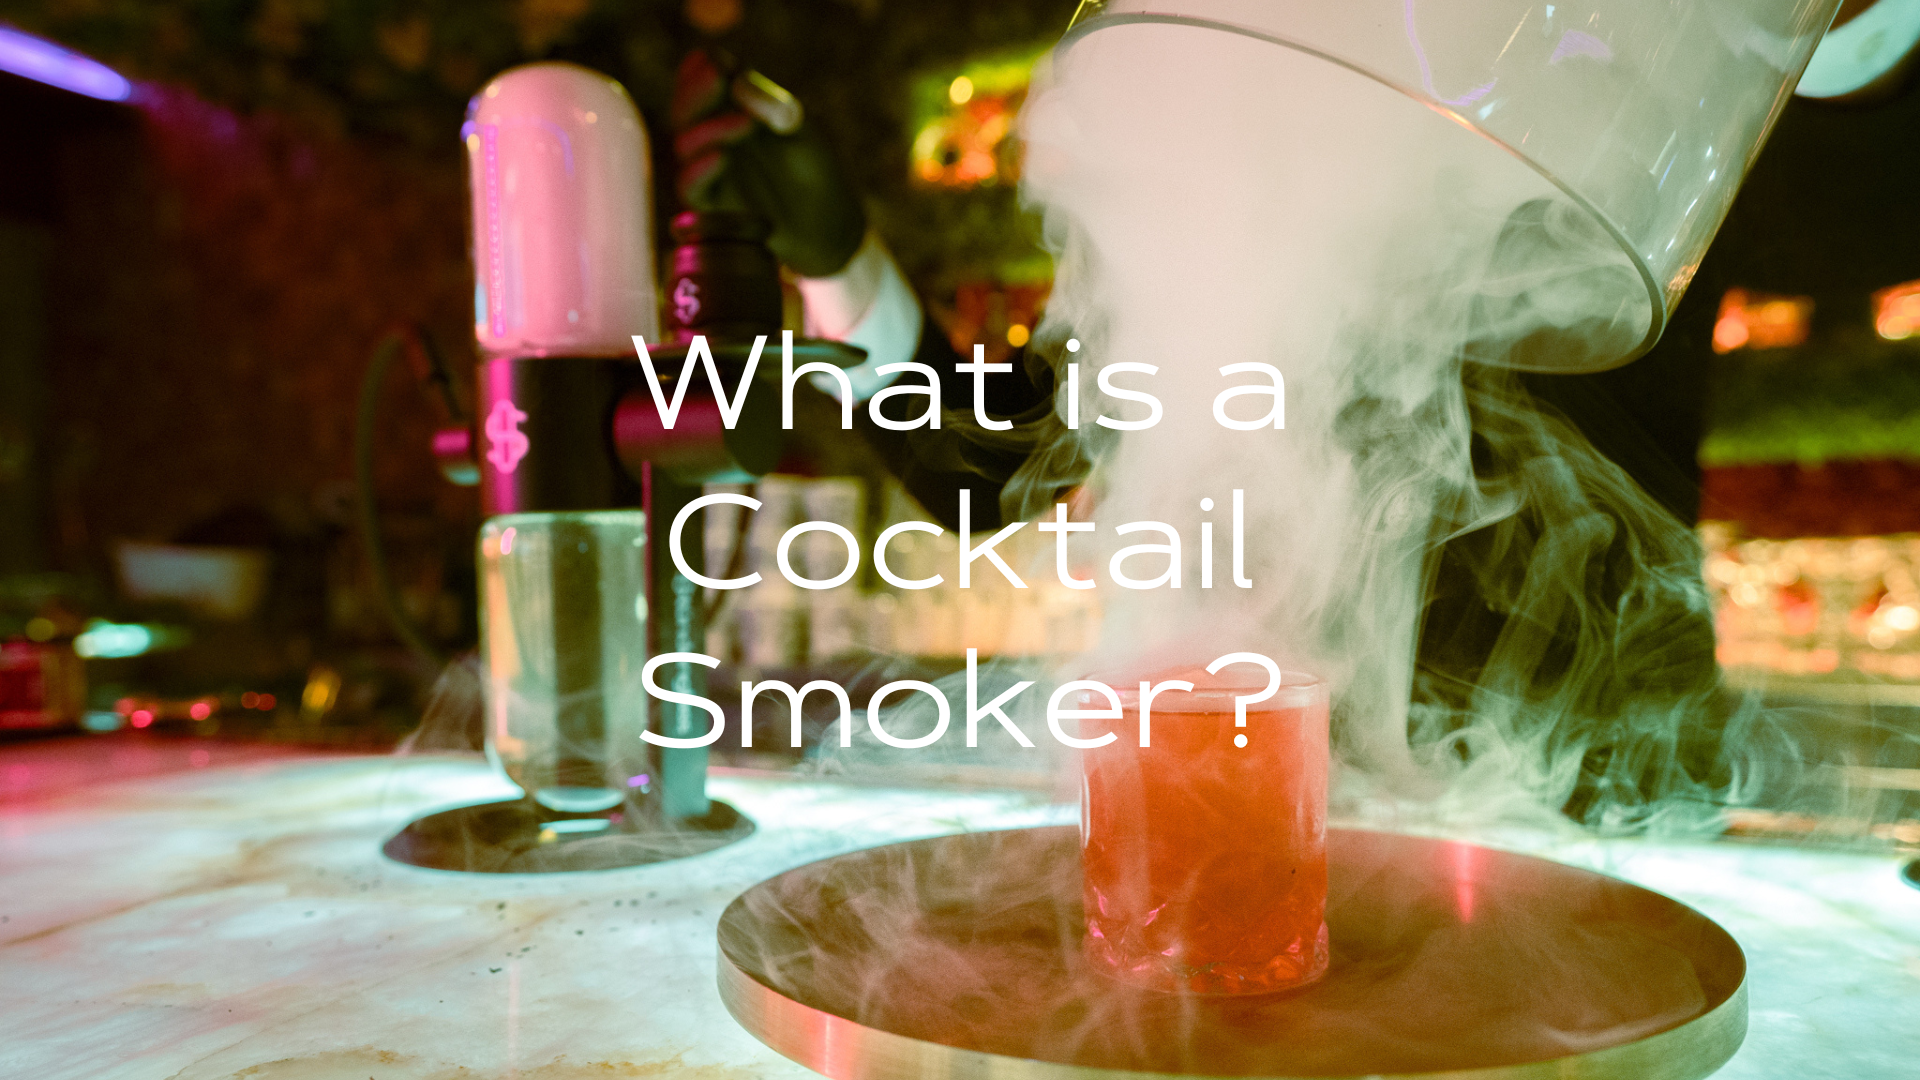 What is a Cocktail Smoker?